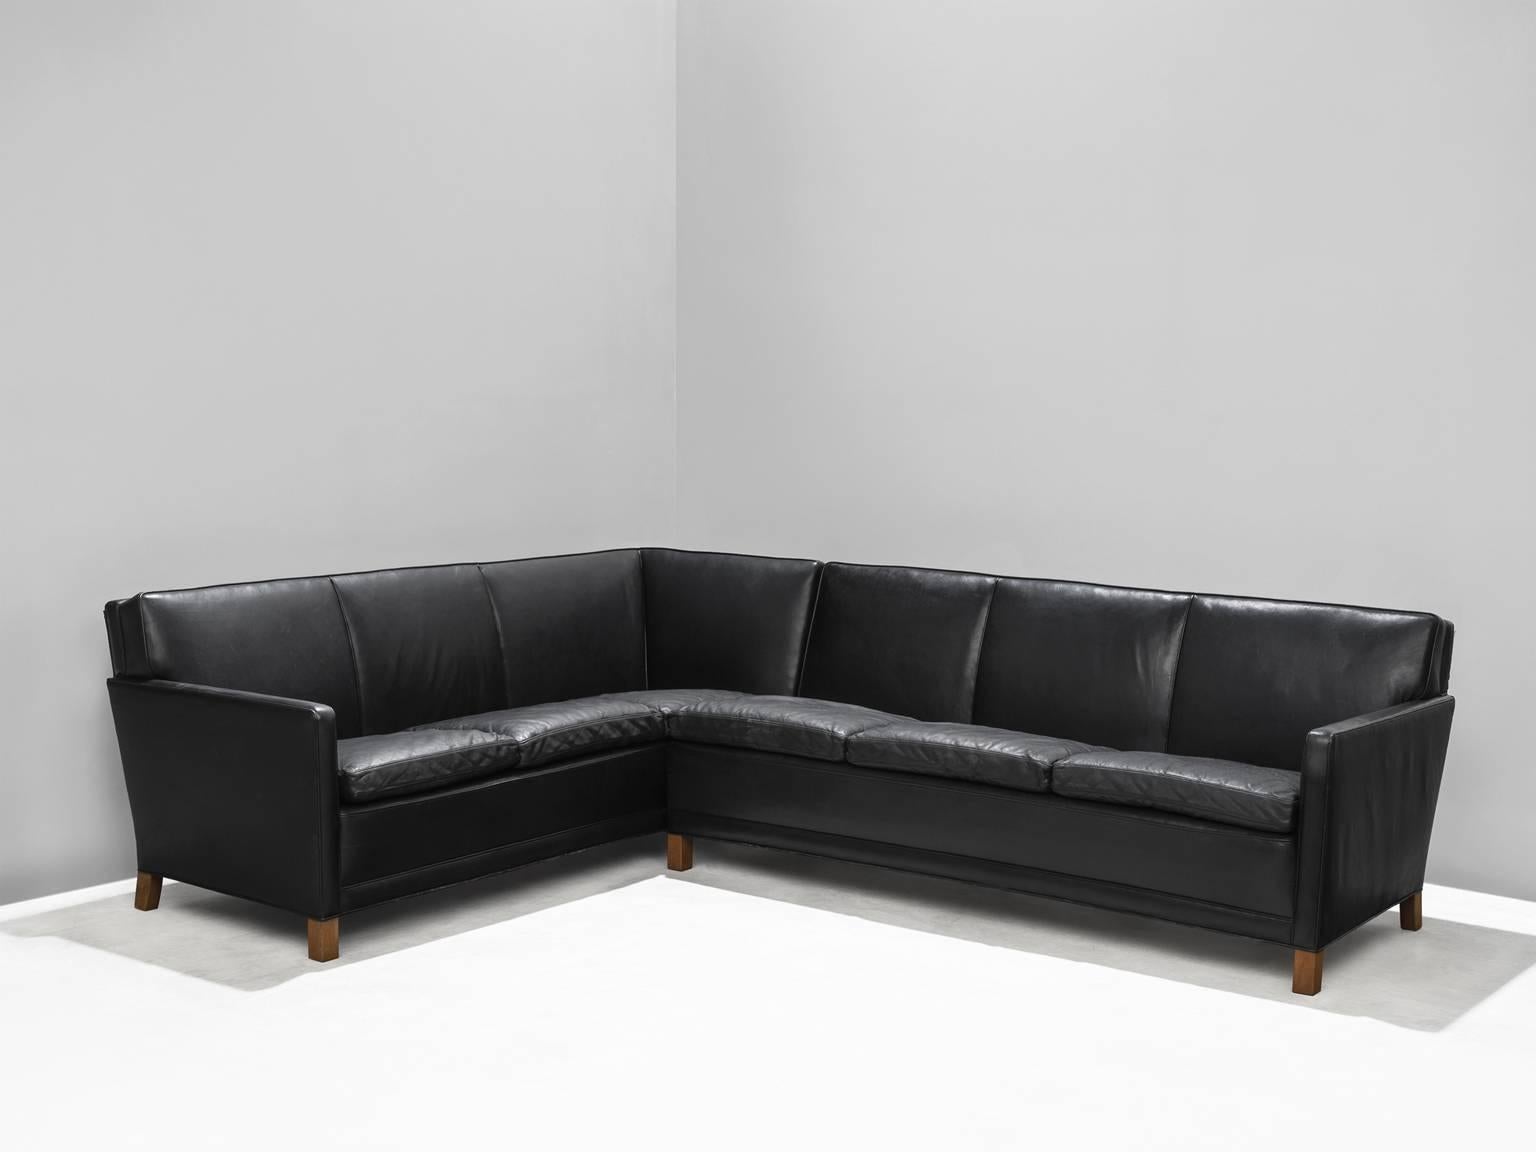 Corner sofa in black leather, foam and wood, Denmark, 1950s.

This sturdy and comfortable sofa is both functional and comfortable at the same time. This archetypical design of the fifties in Denmark has six sitting elements and will easily